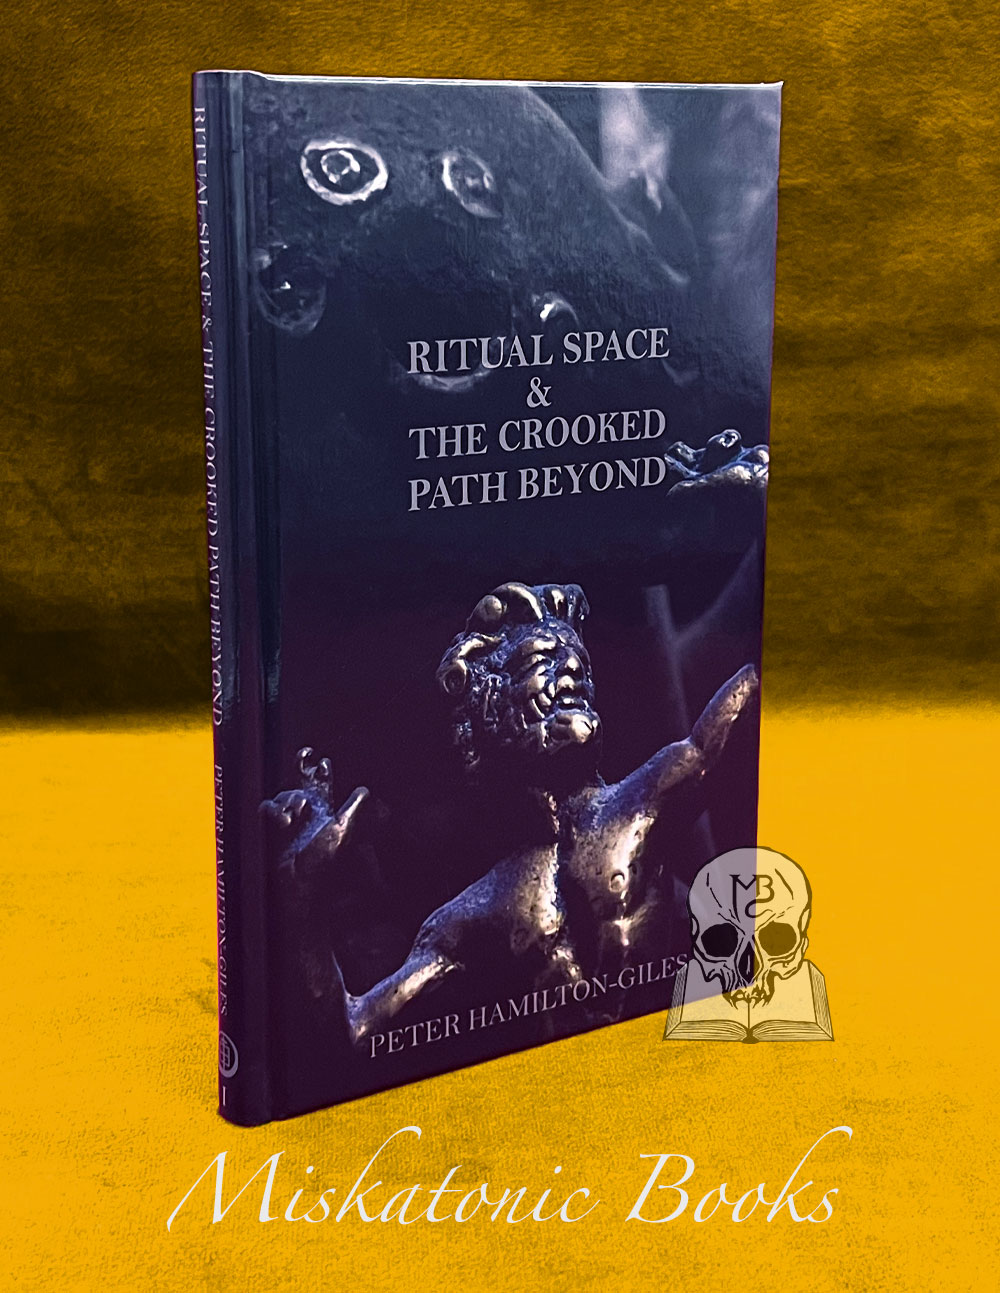 RITUAL SPACE AND THE CROOKED PATH BEYOND by Peter Hamilton-Giles - Limited Edition Hardcover